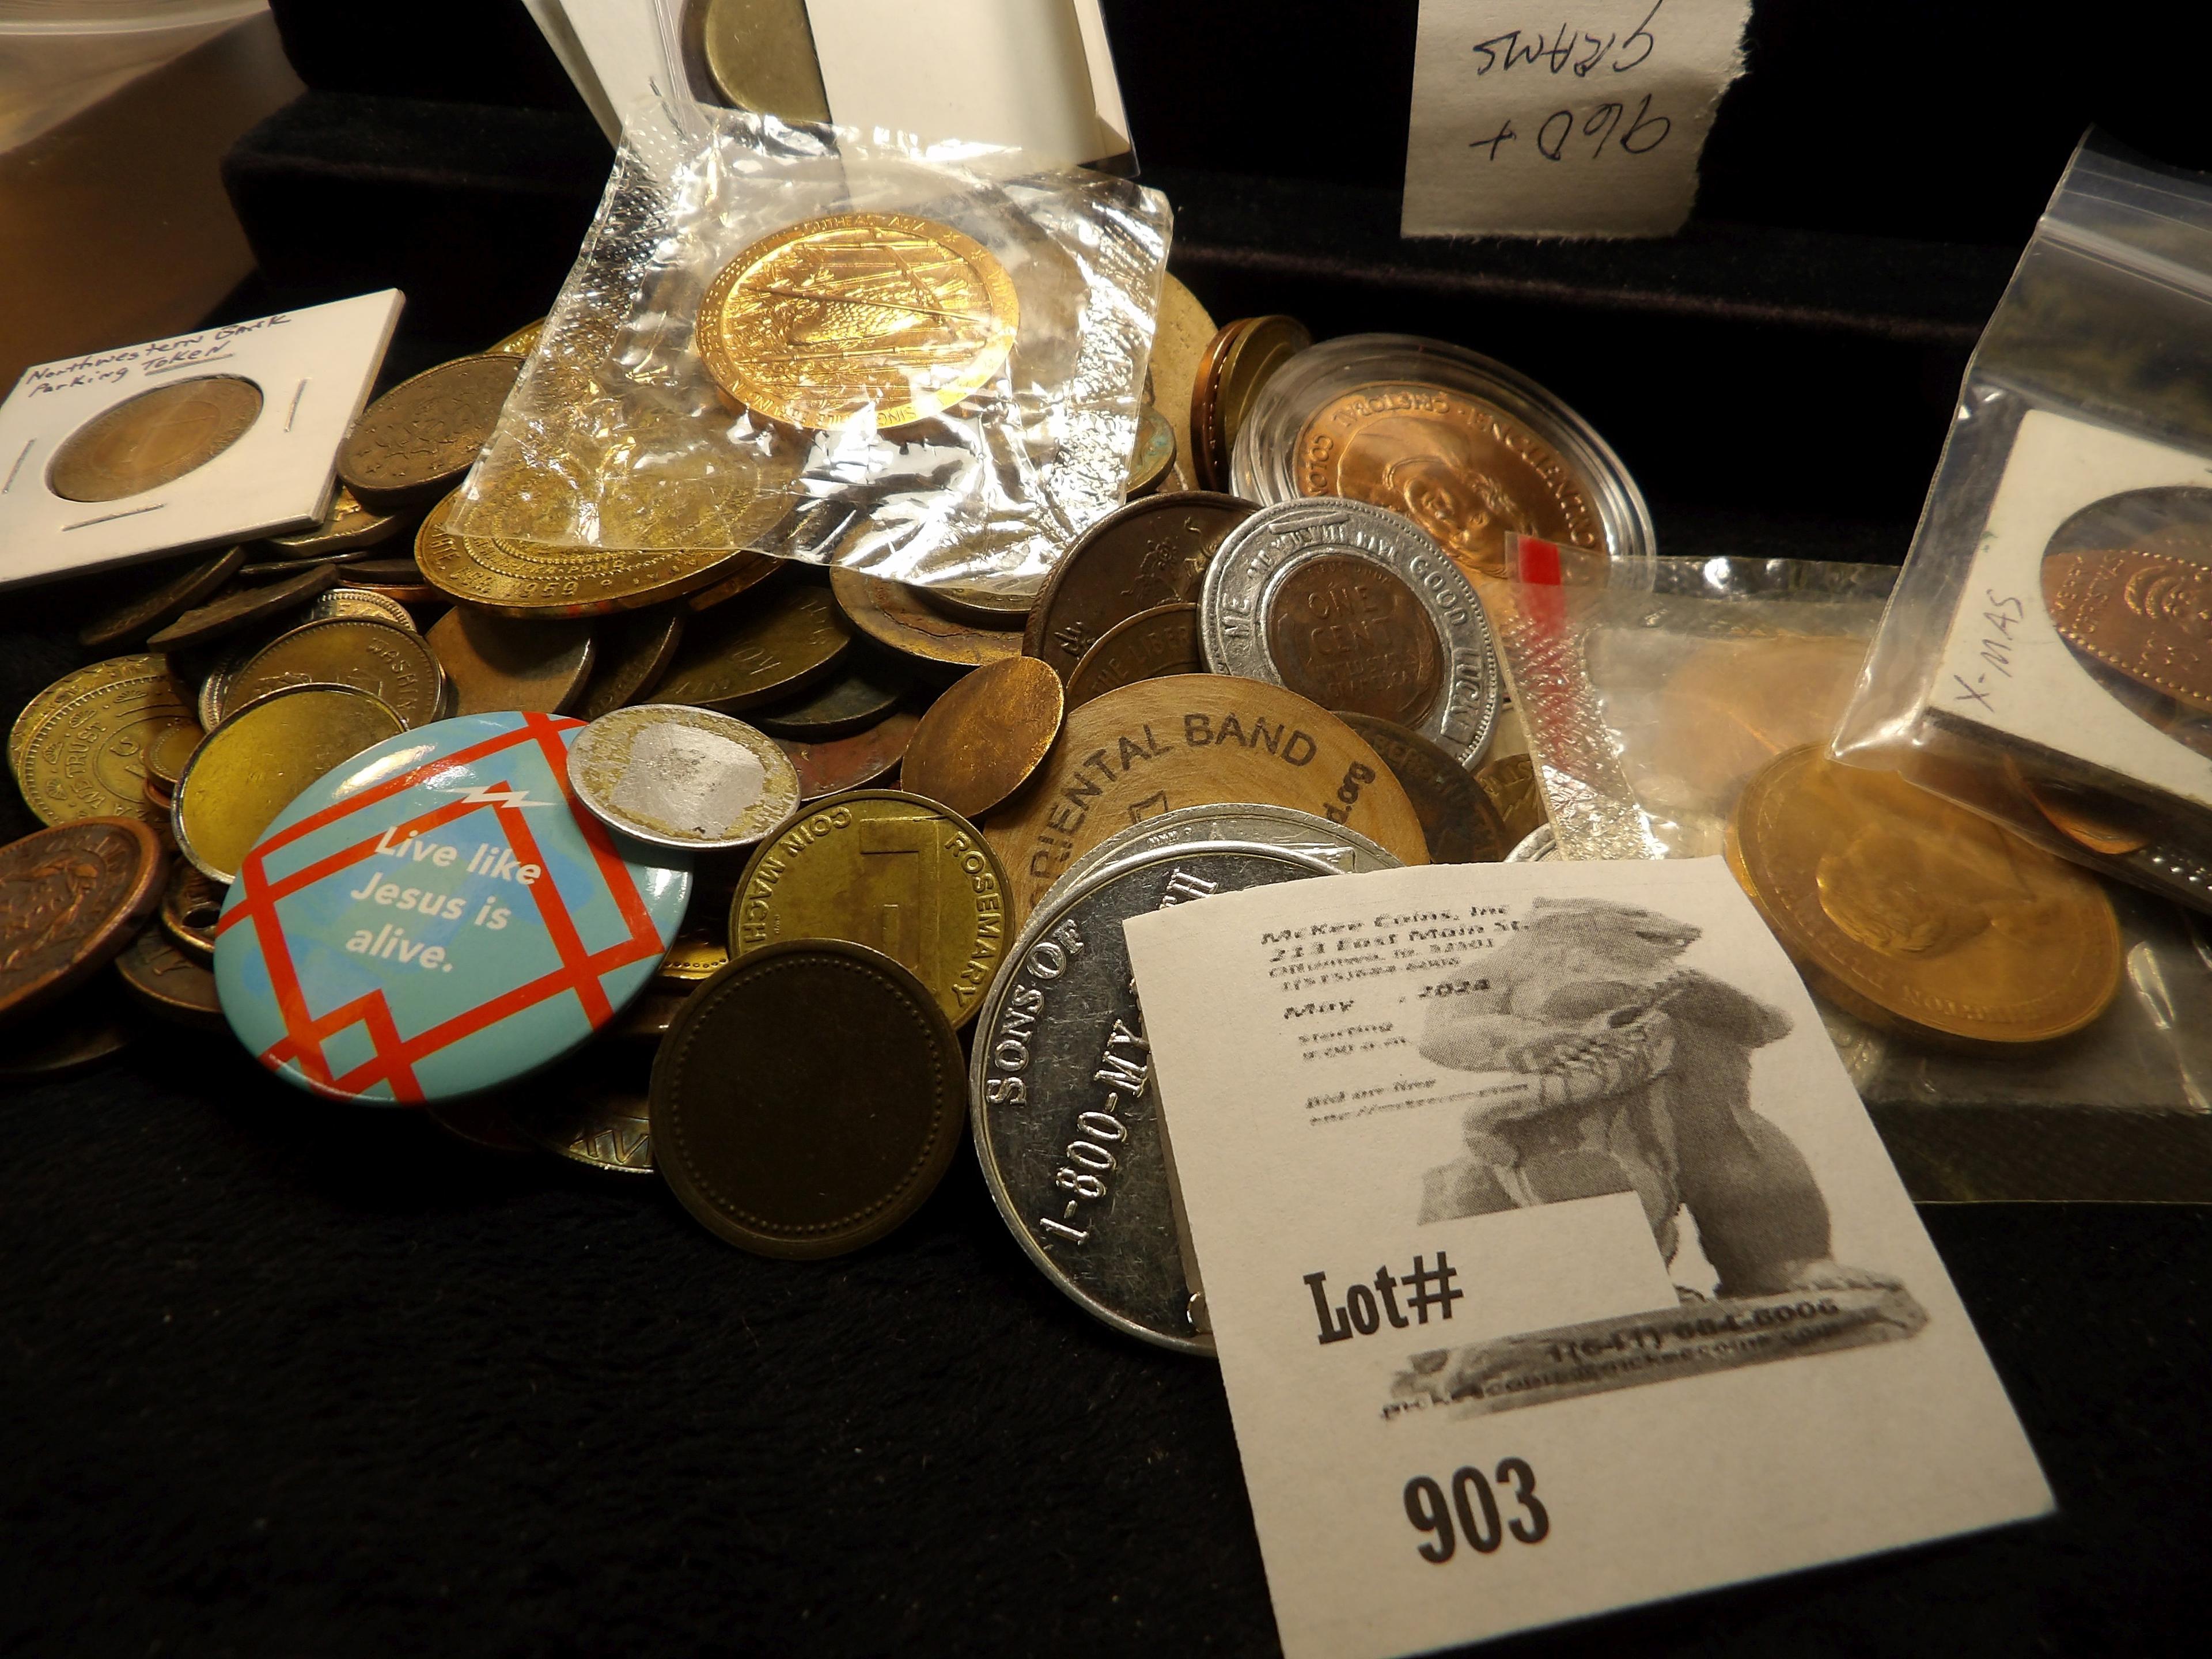 Lot of Medals, Tokens, & what ever including an 1850 U.S. Large Cent, total weight of this lot is ov